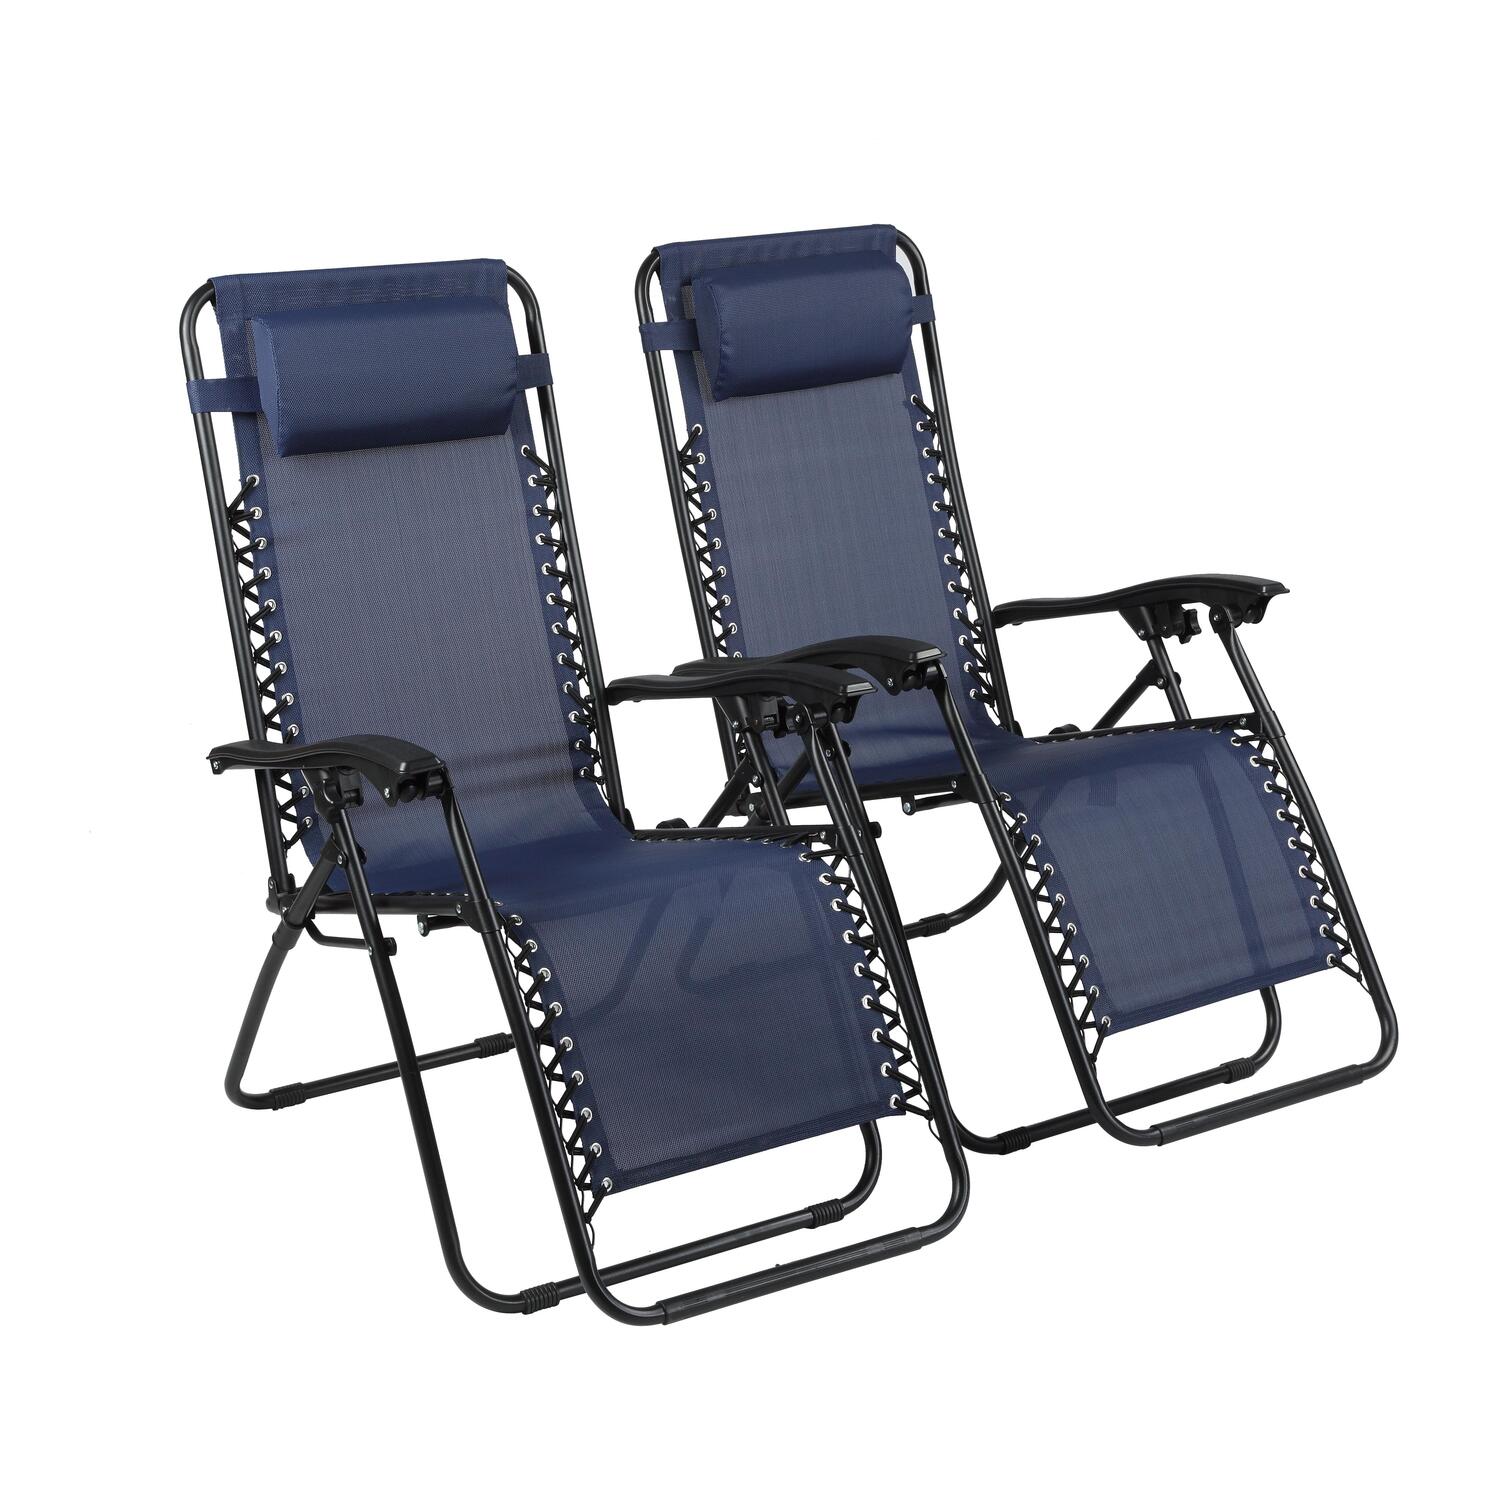 Zero Gravity Chairs Set of 2 Pool Lounge Chair Zero Gravity Recliner Lawn Patio Outdoor Porch Beach Backyard Anti Gravity Chair Folding Reclining Camping Chair, Blue - image 5 of 9